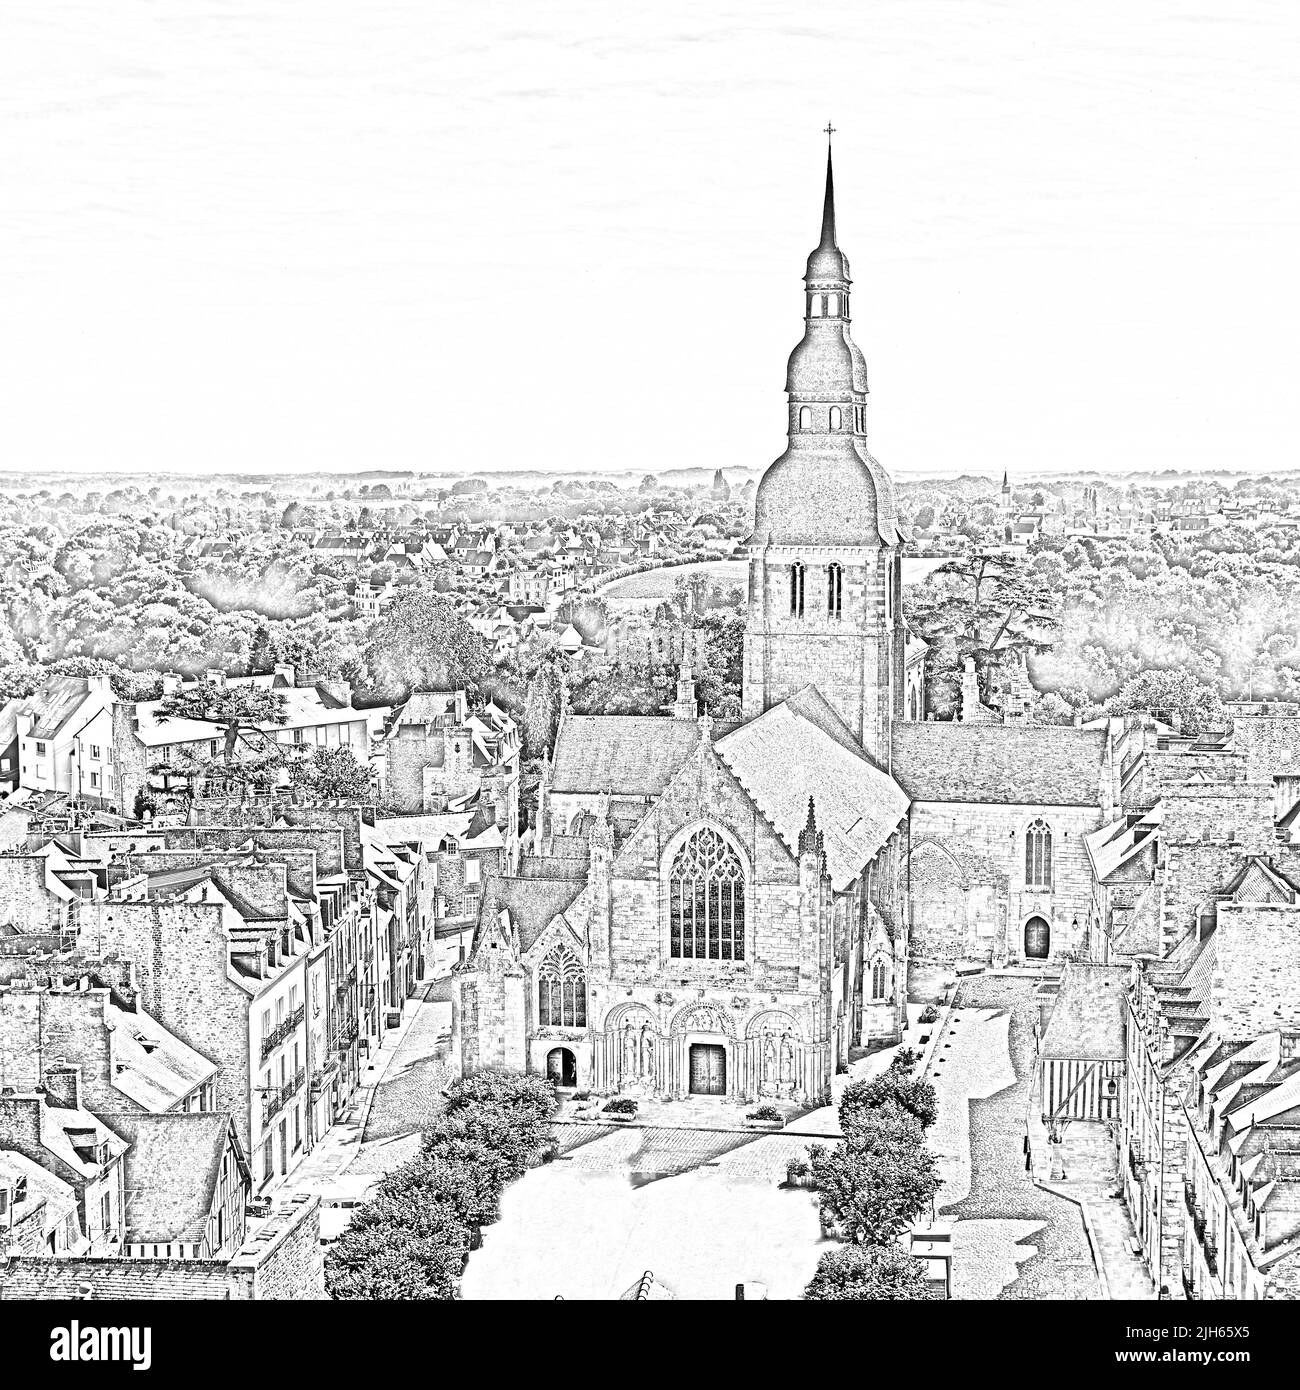 Digital Image of Dinan with Saint Saviours Church in a pencil drawing style Stock Photo